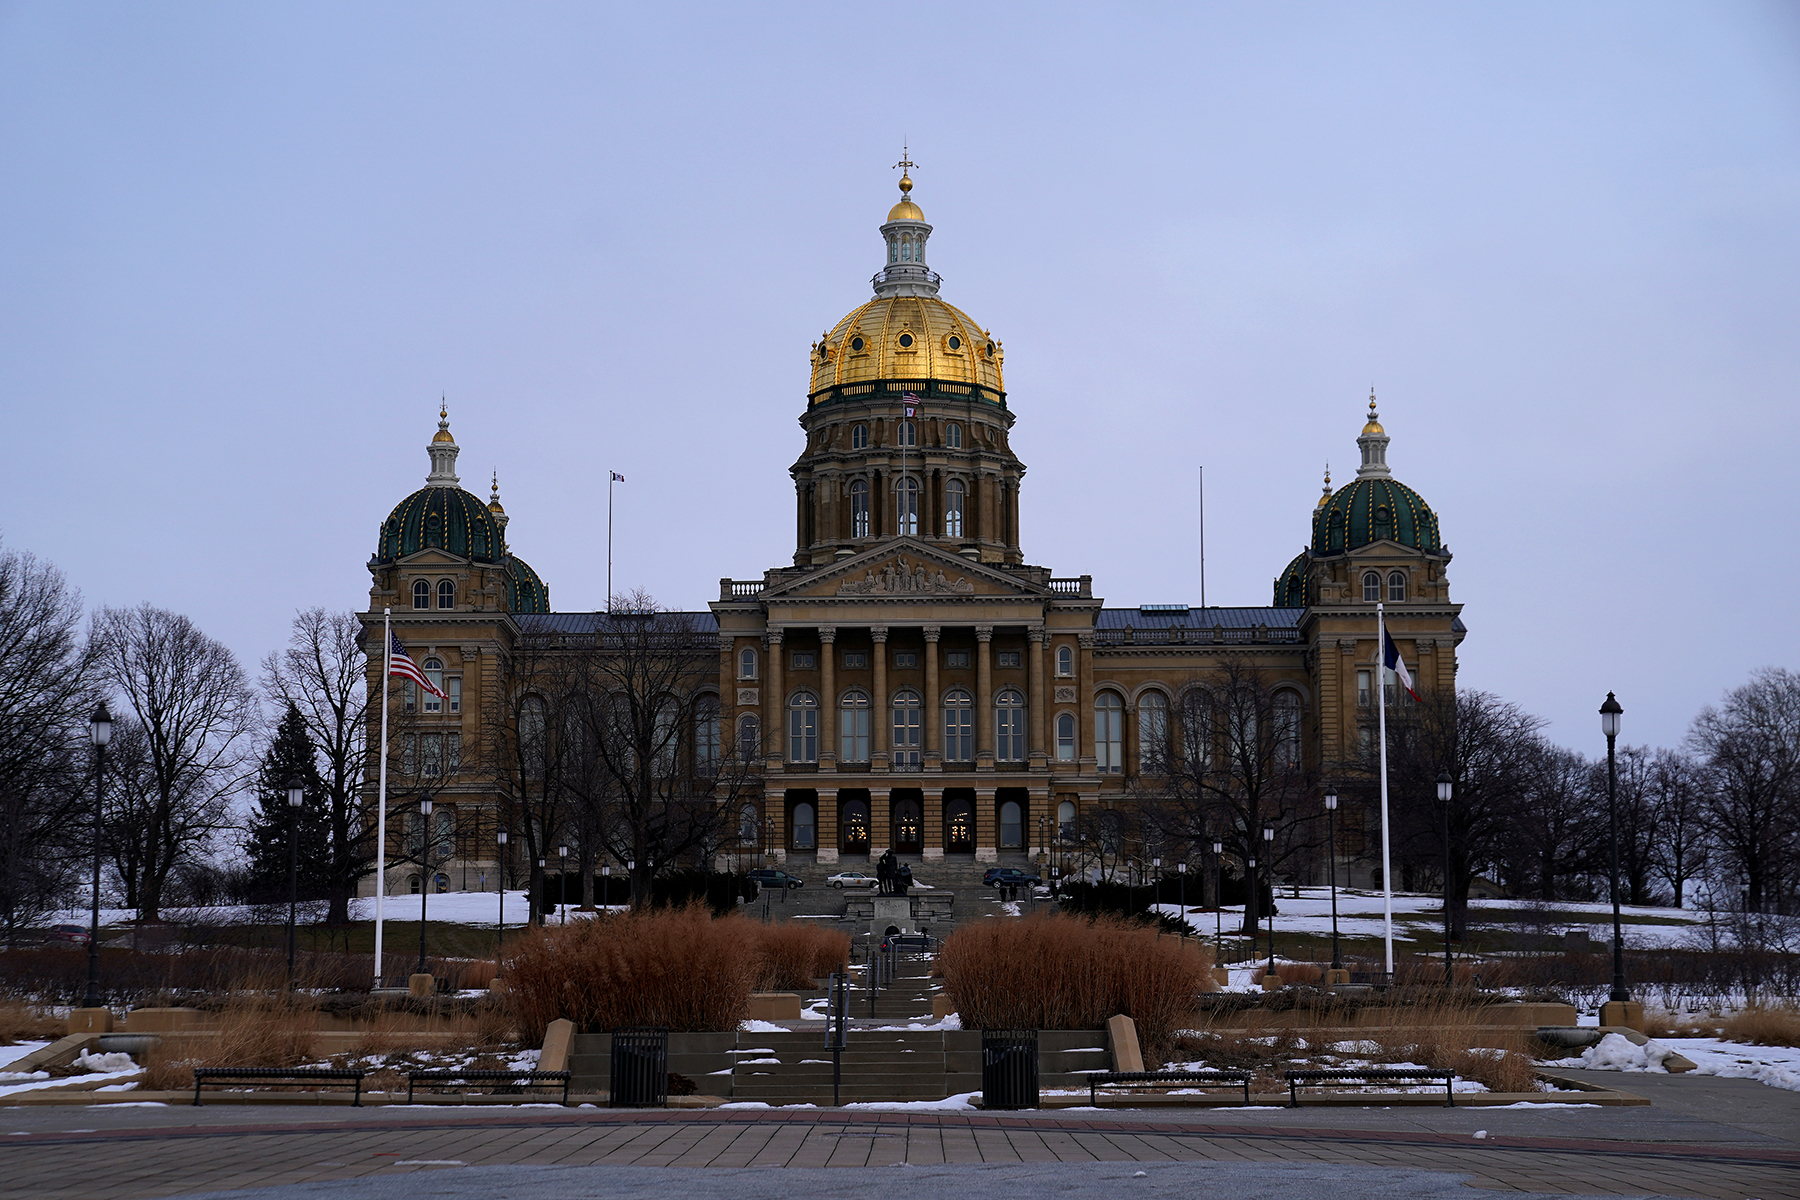 The Iowa state capitol building is pictured in Des Moines